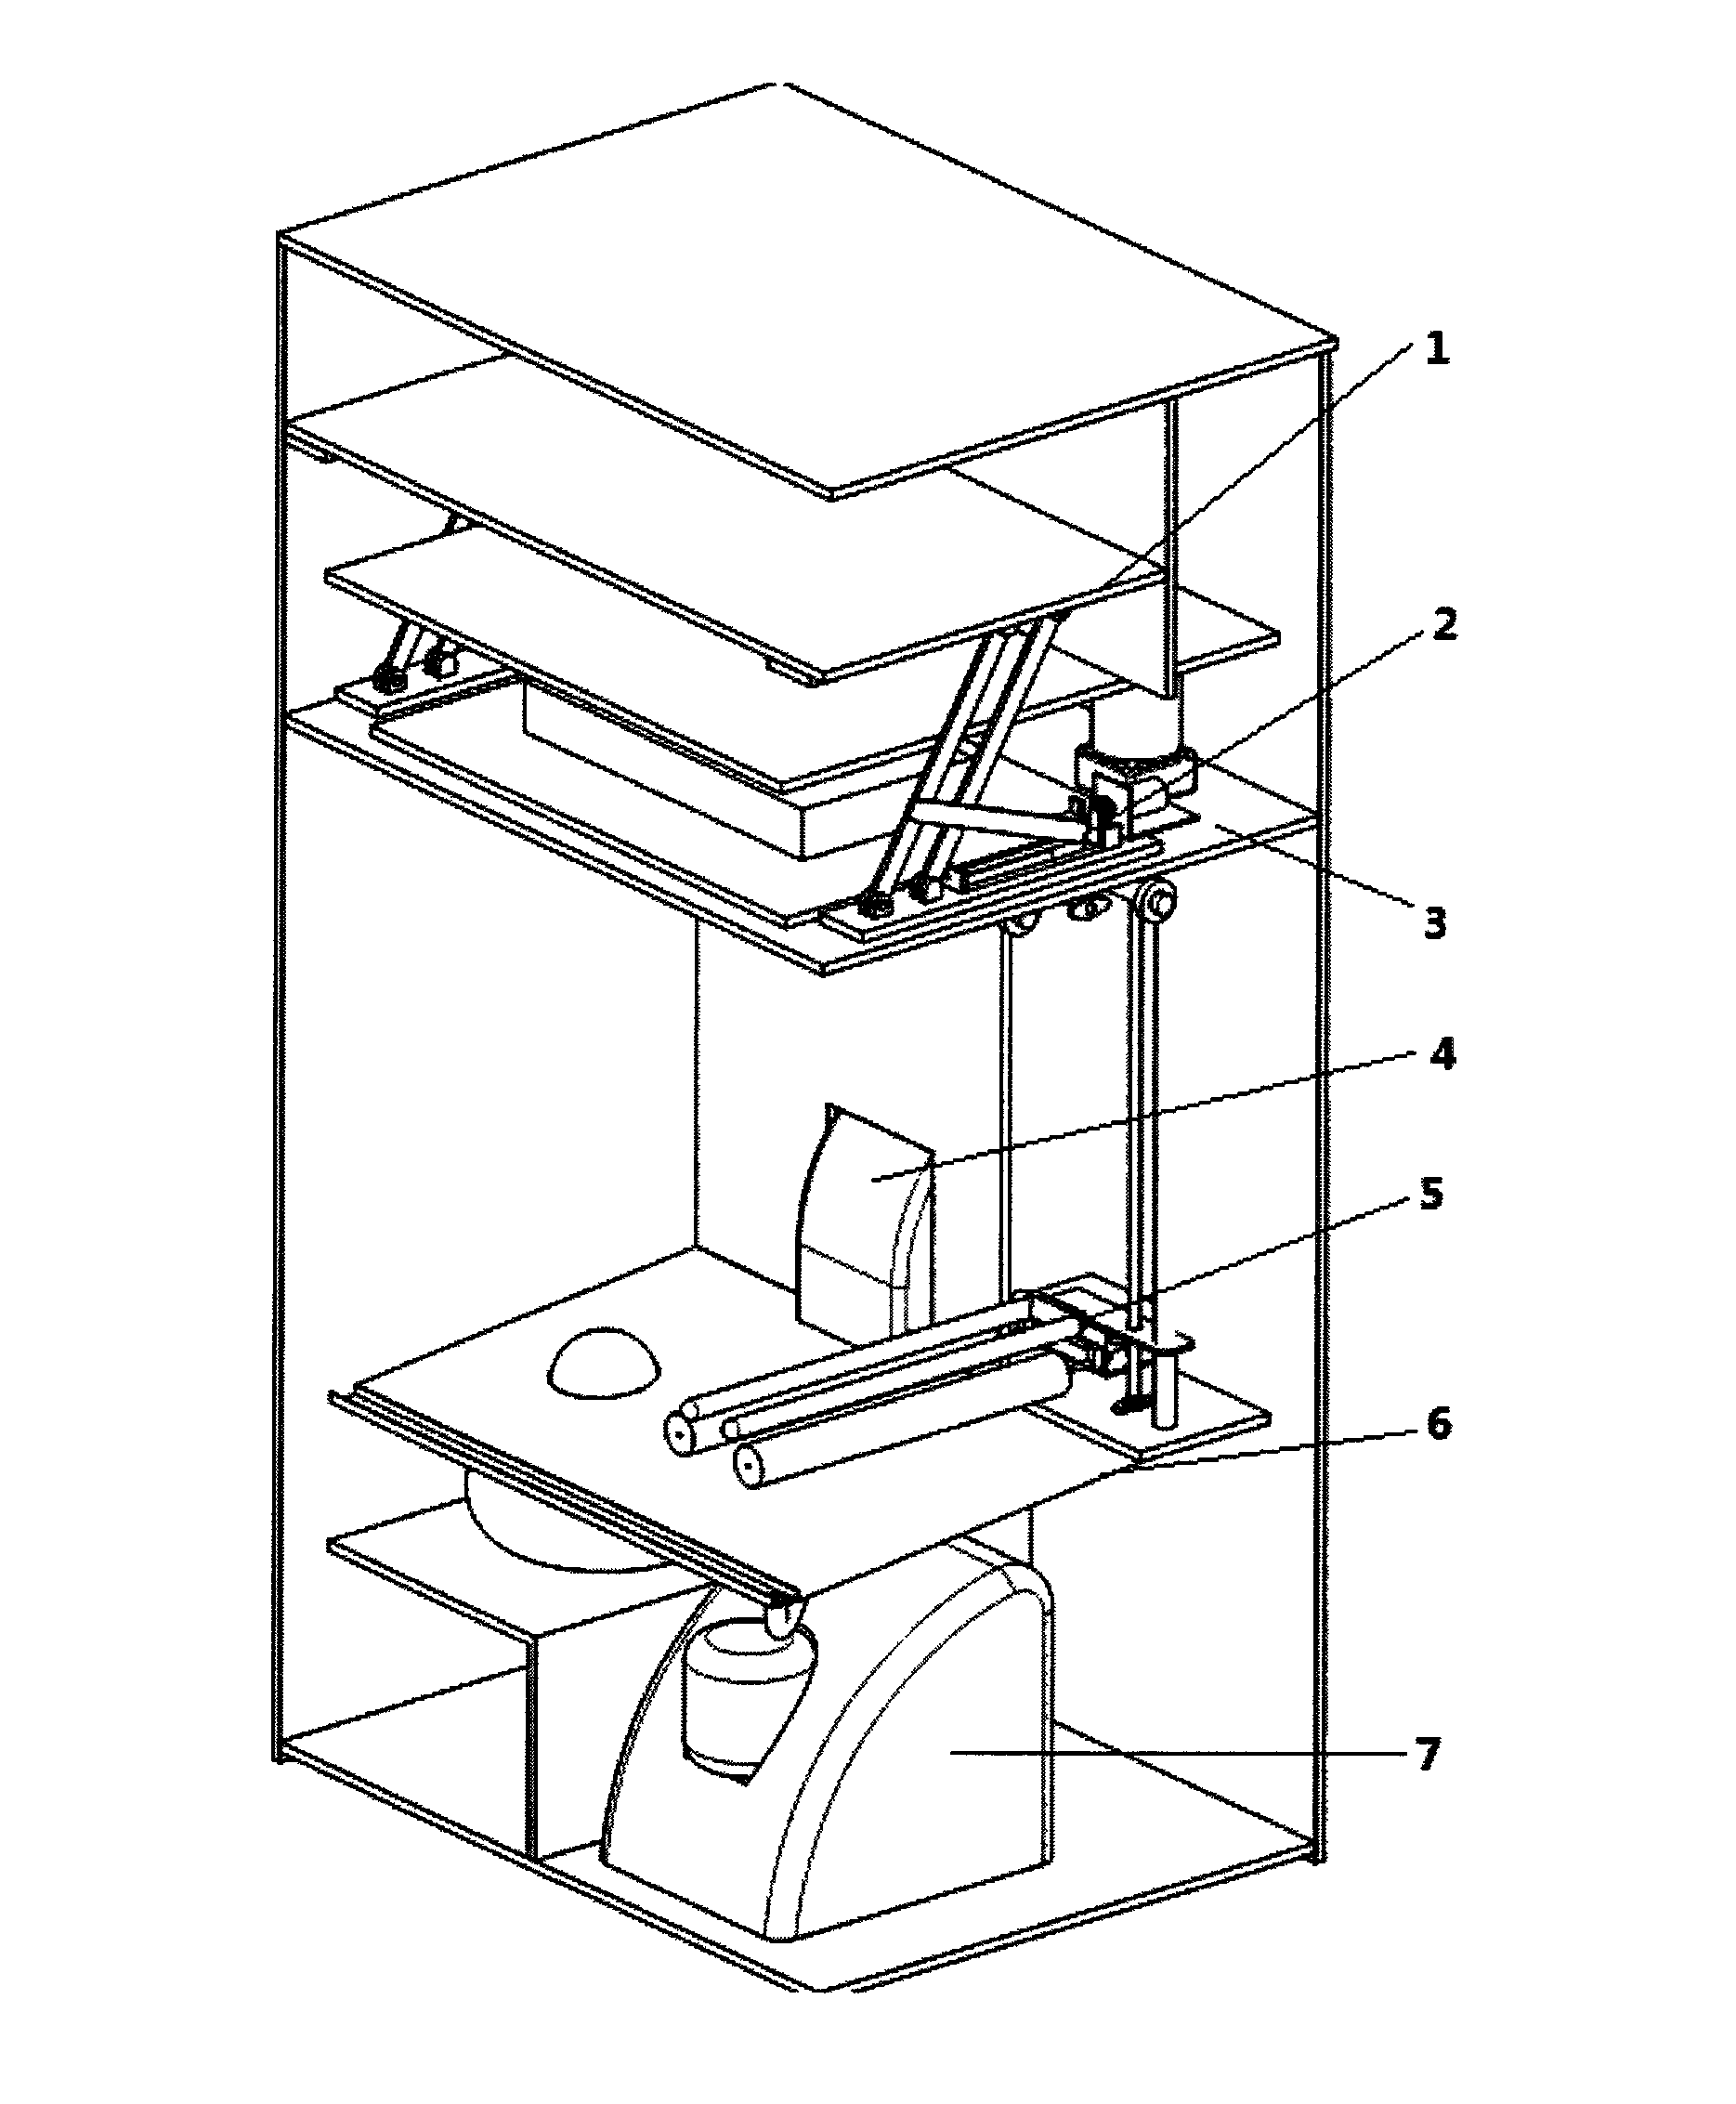 Full-automatic integral ironing wardrobe allowed to ascend and descend